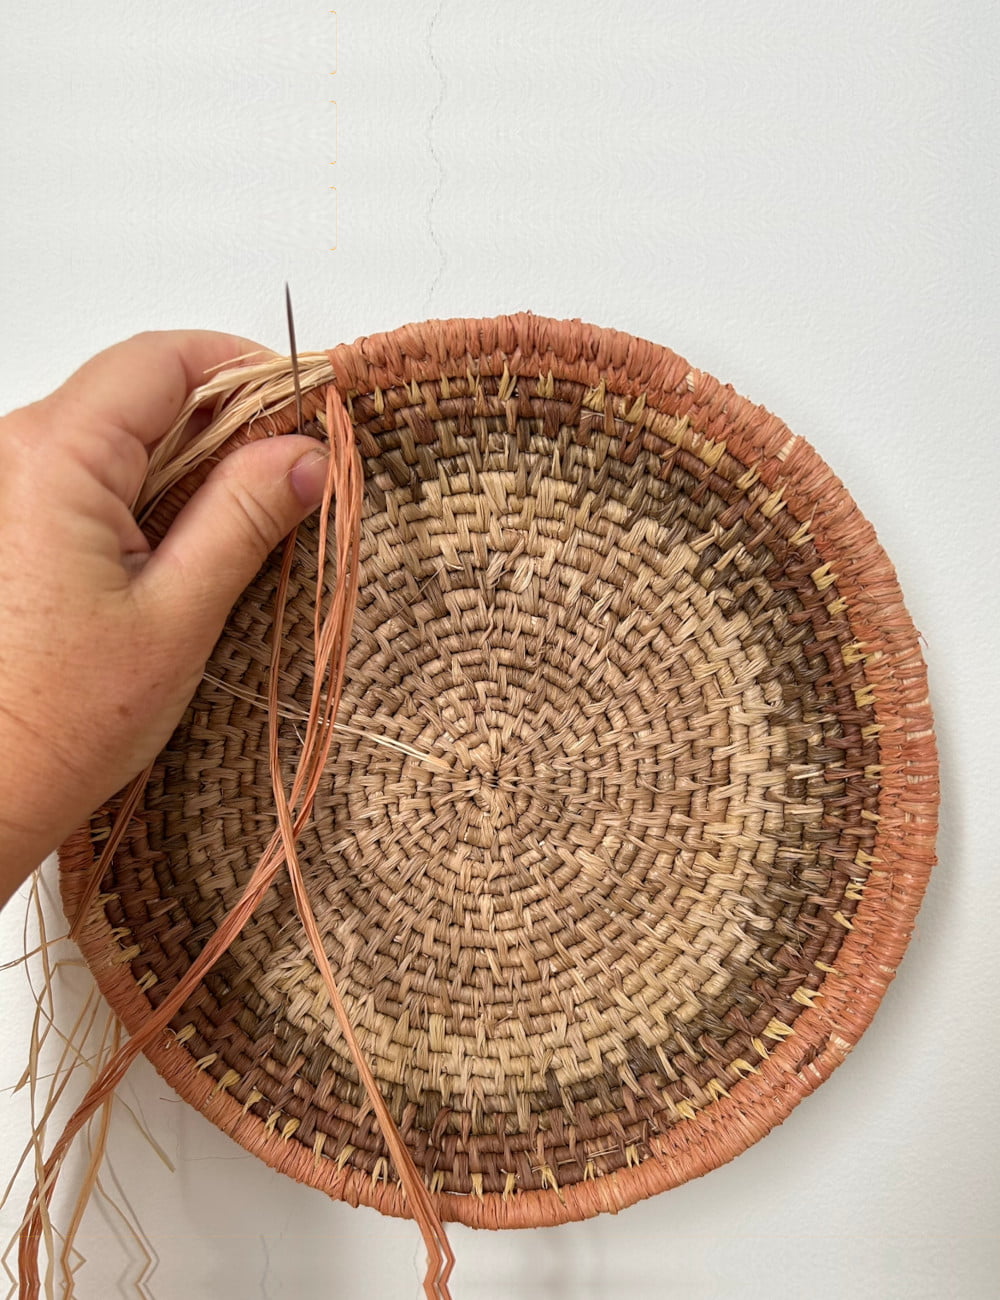 How to weave raffia basket course